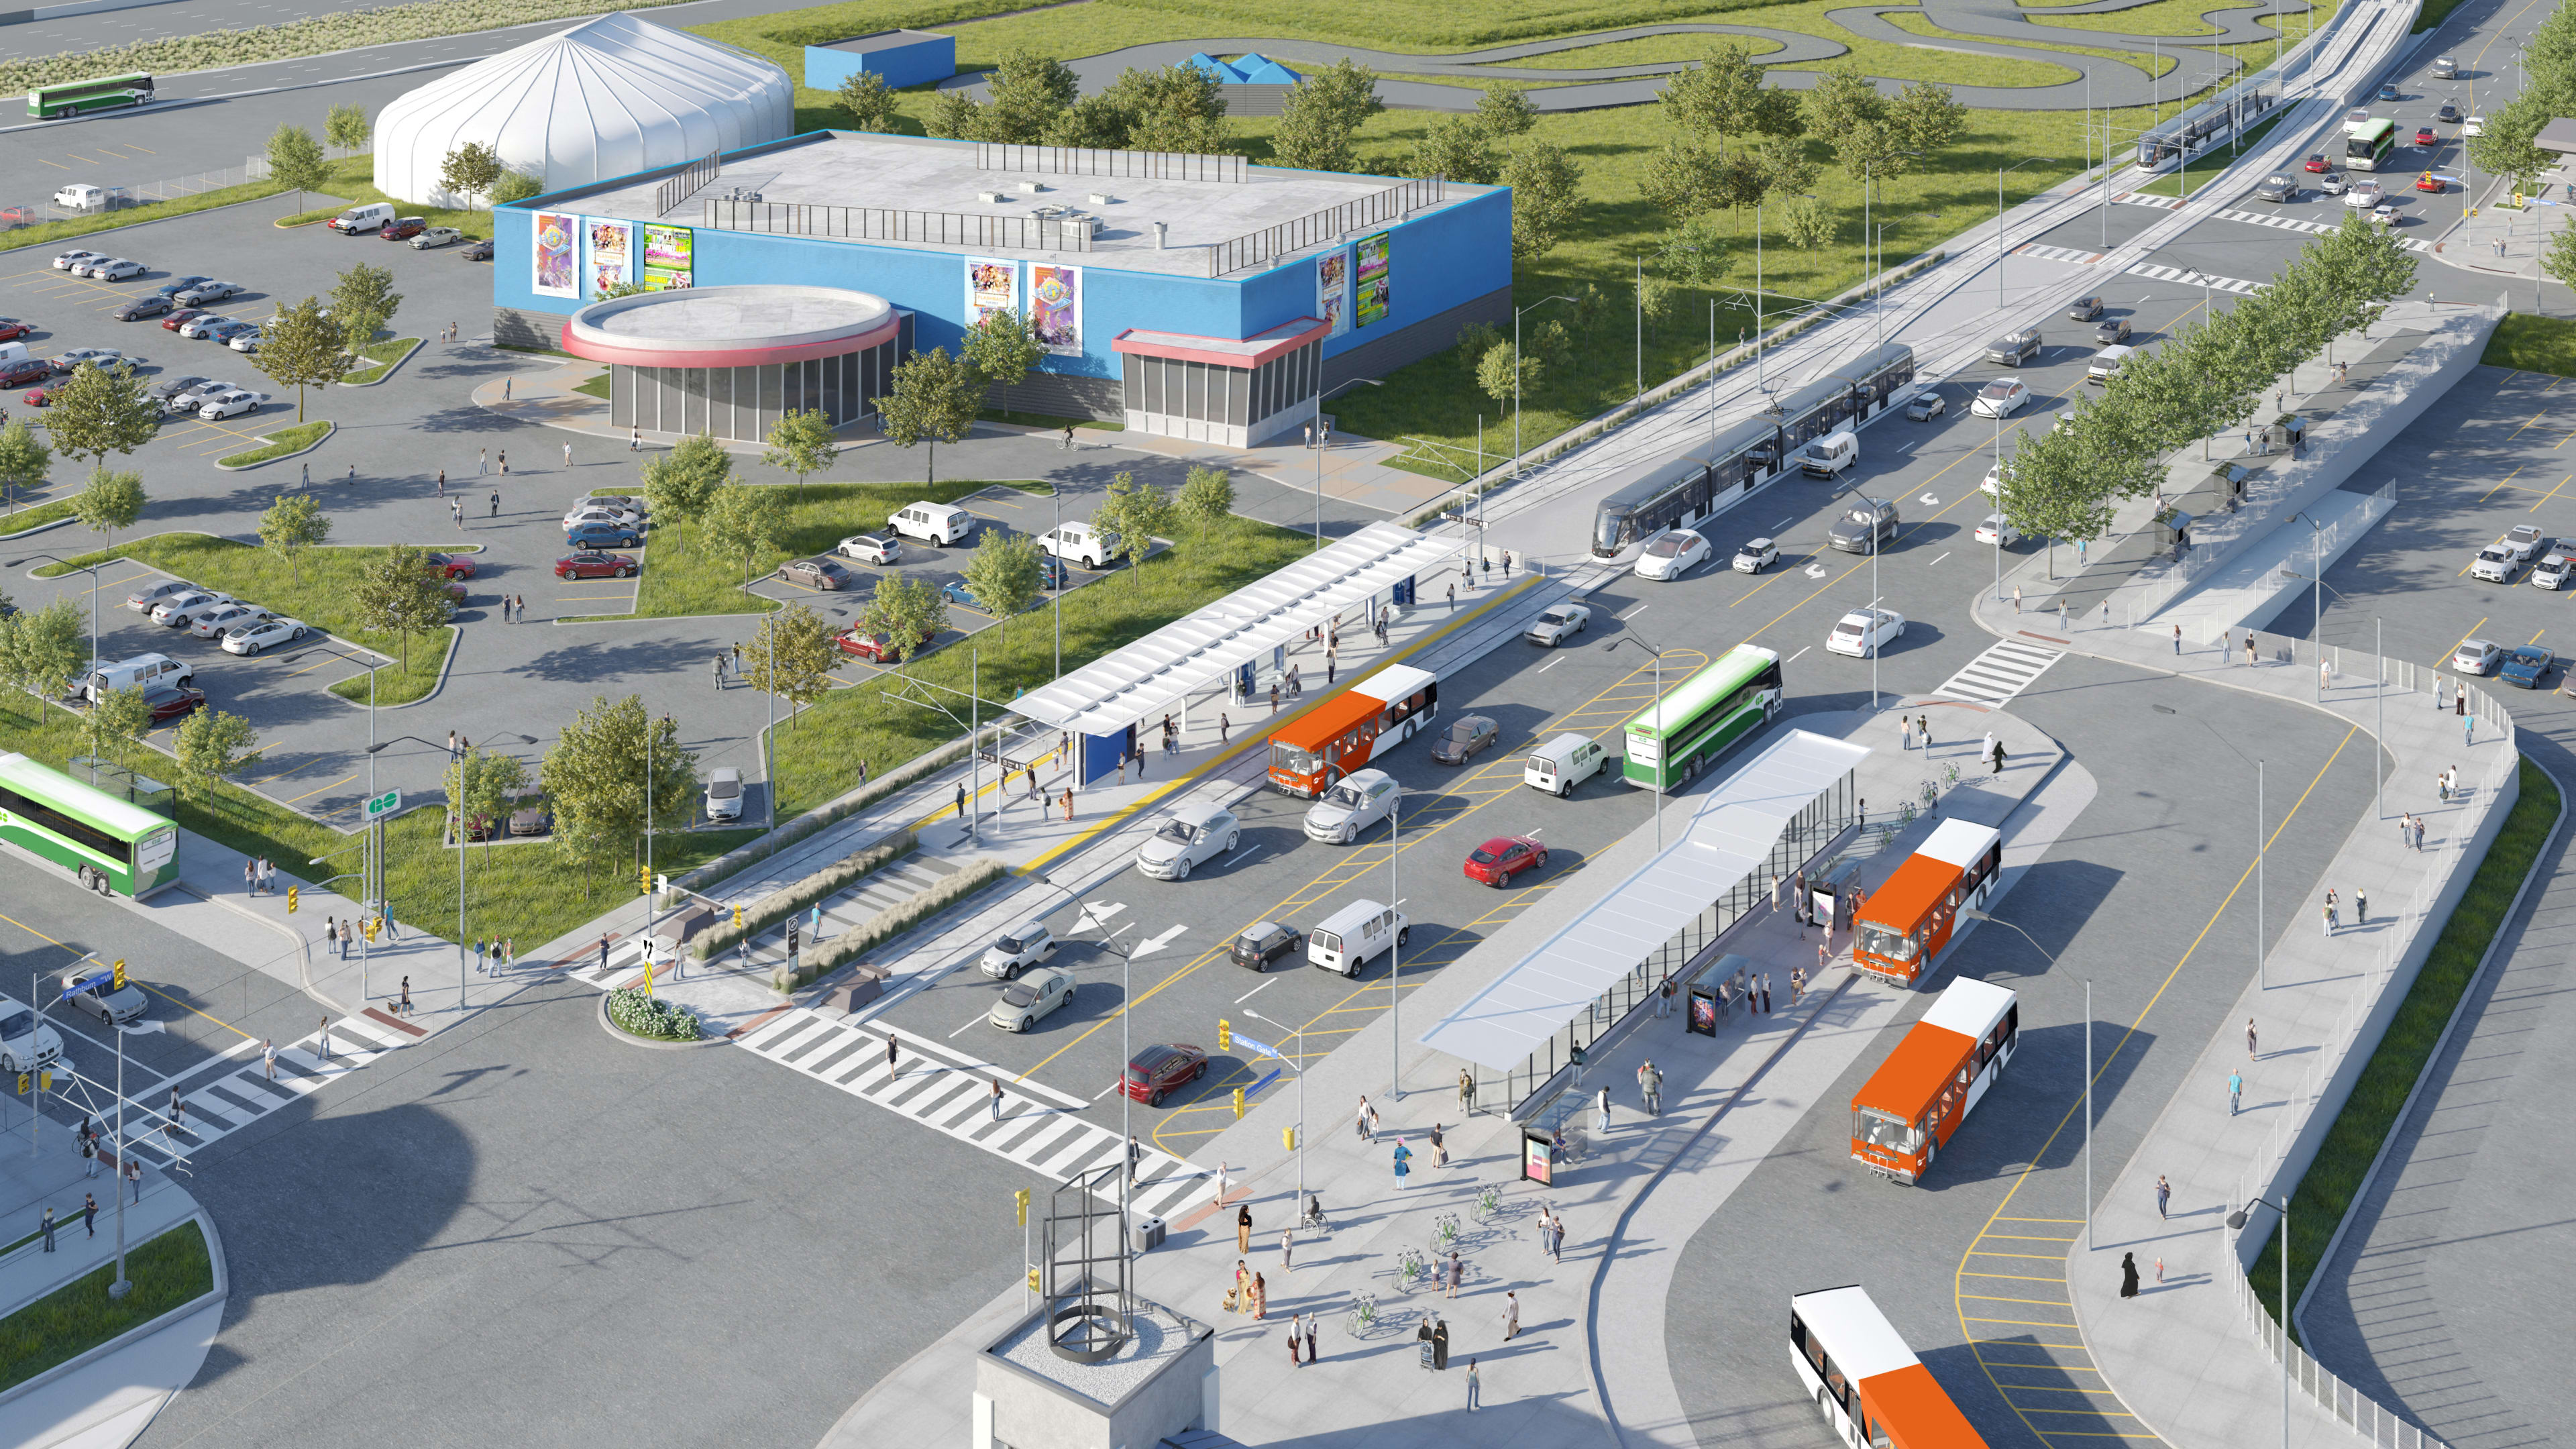 Rendering shows the LRT as part of the transit hub at City Centre in Mississauga